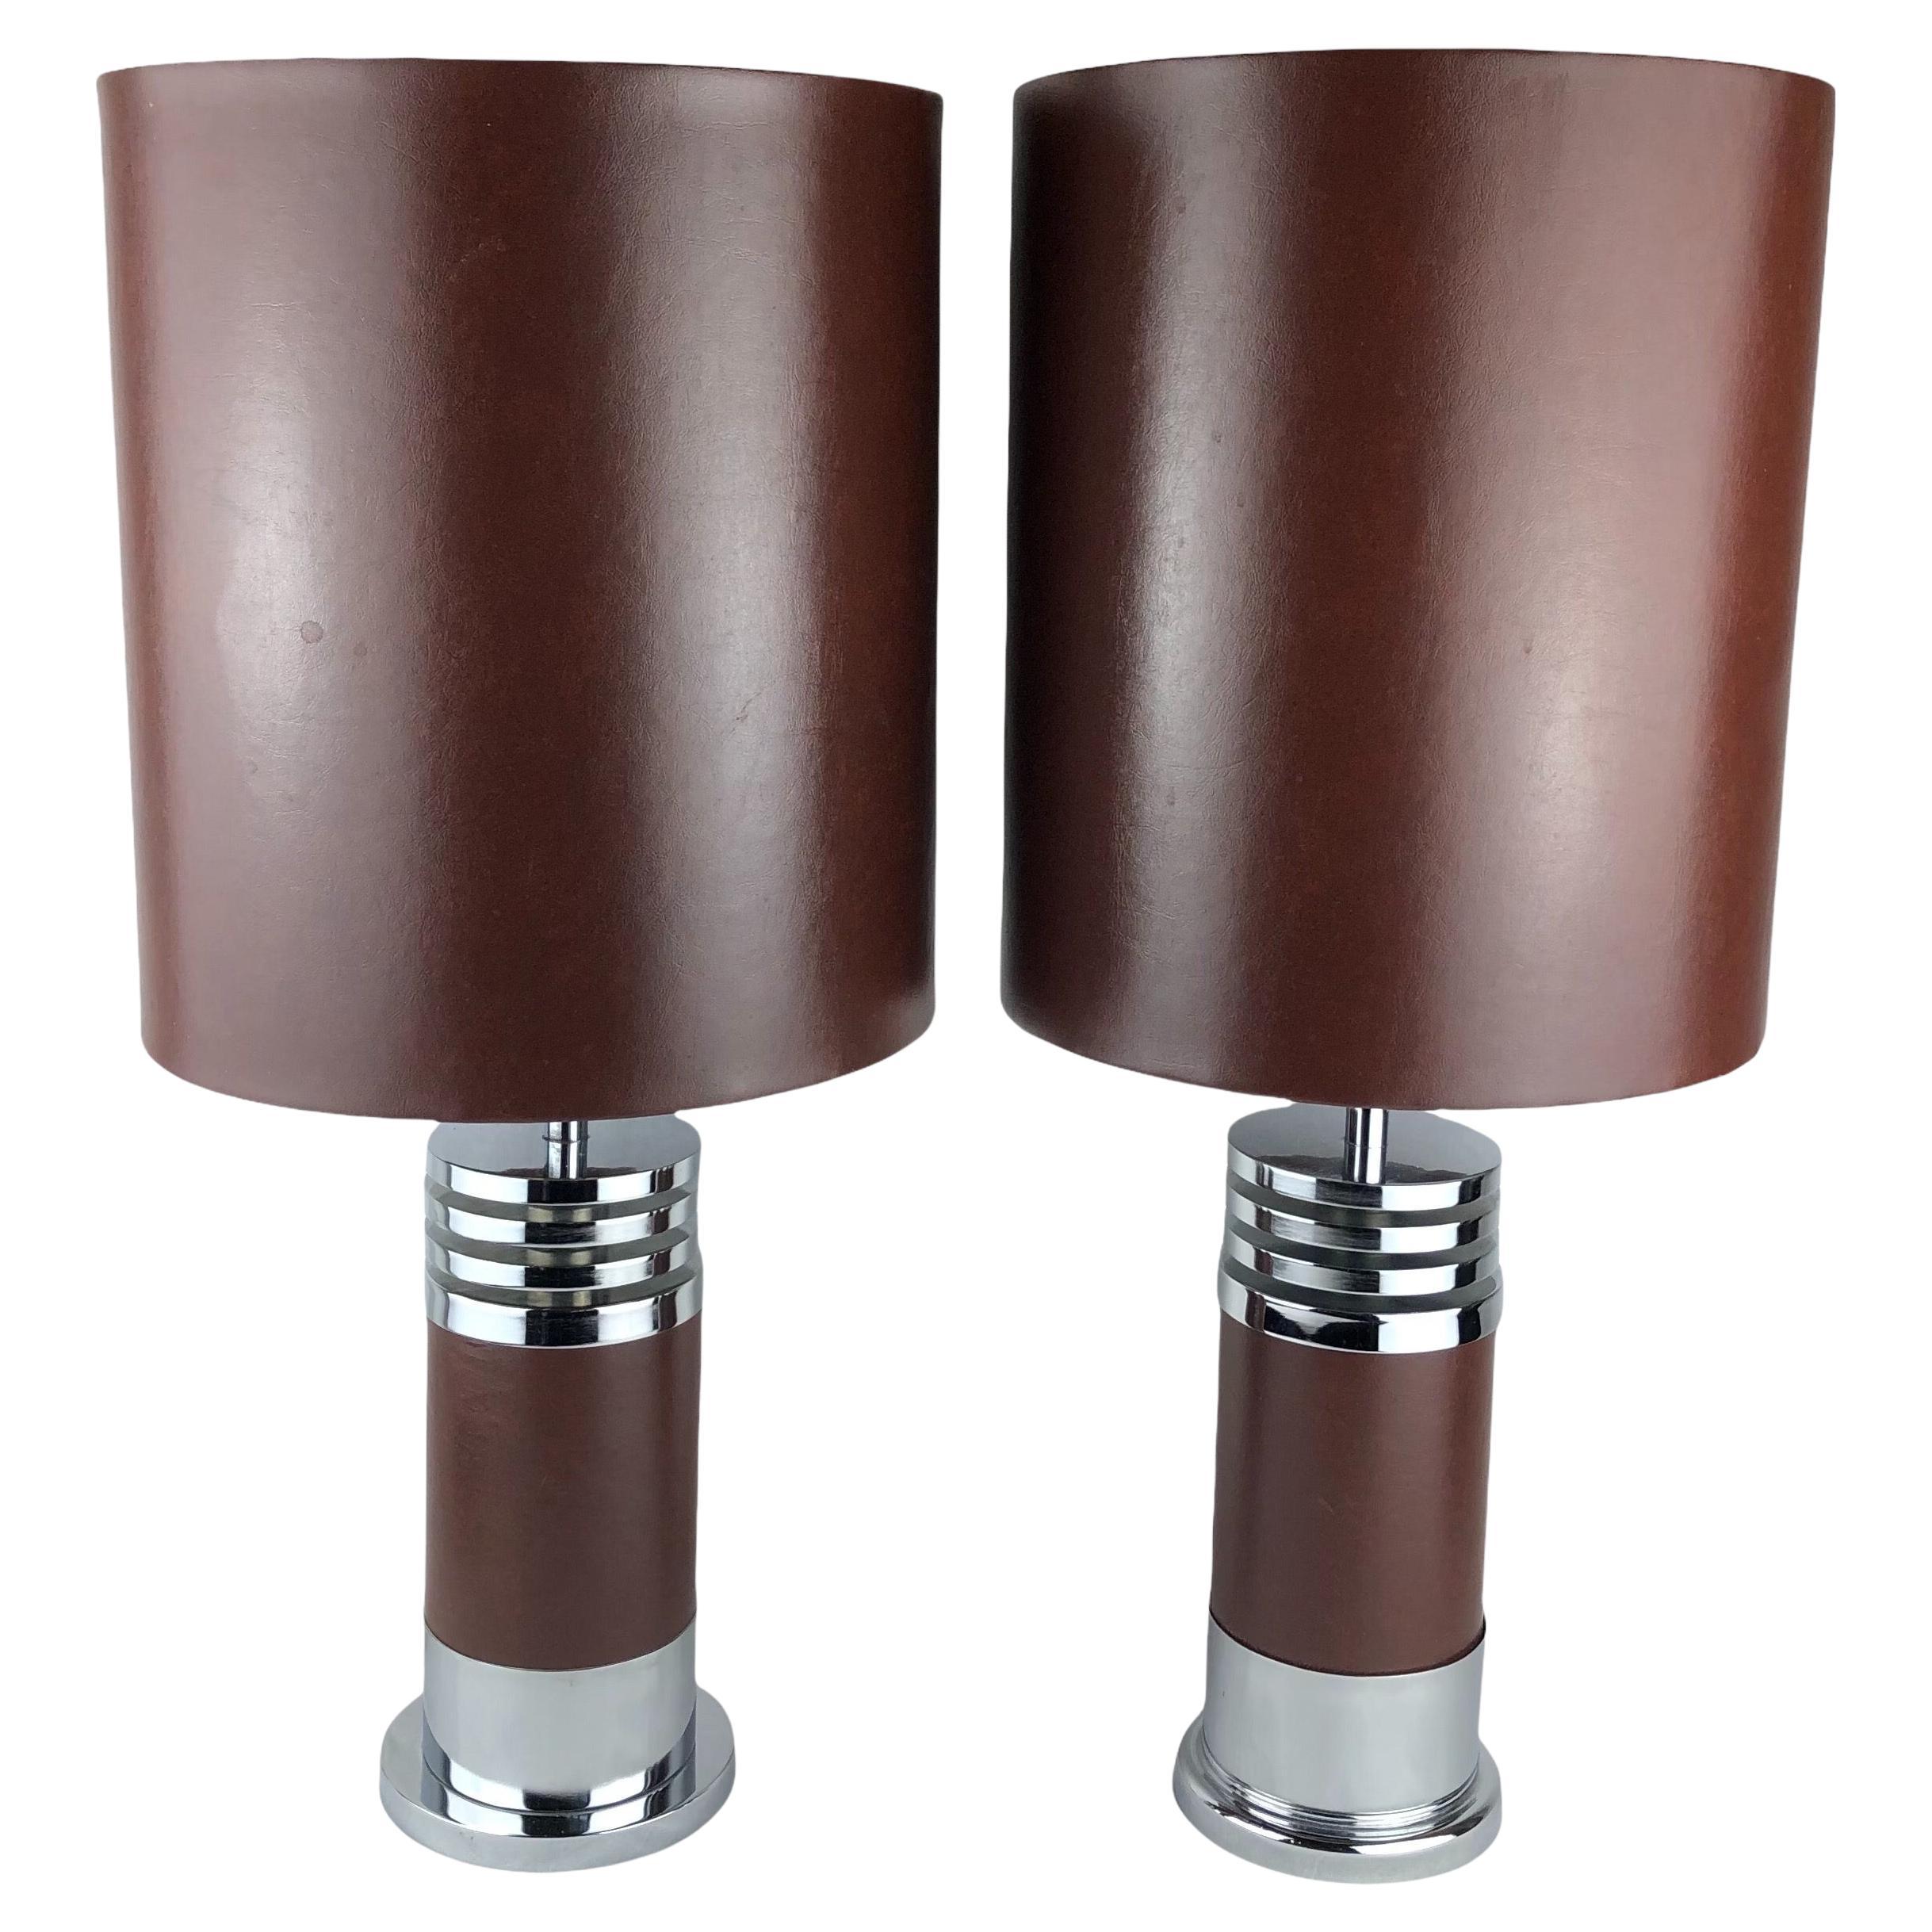 Pair of Table Lamps from Roche Bobois Designs, circa 1975